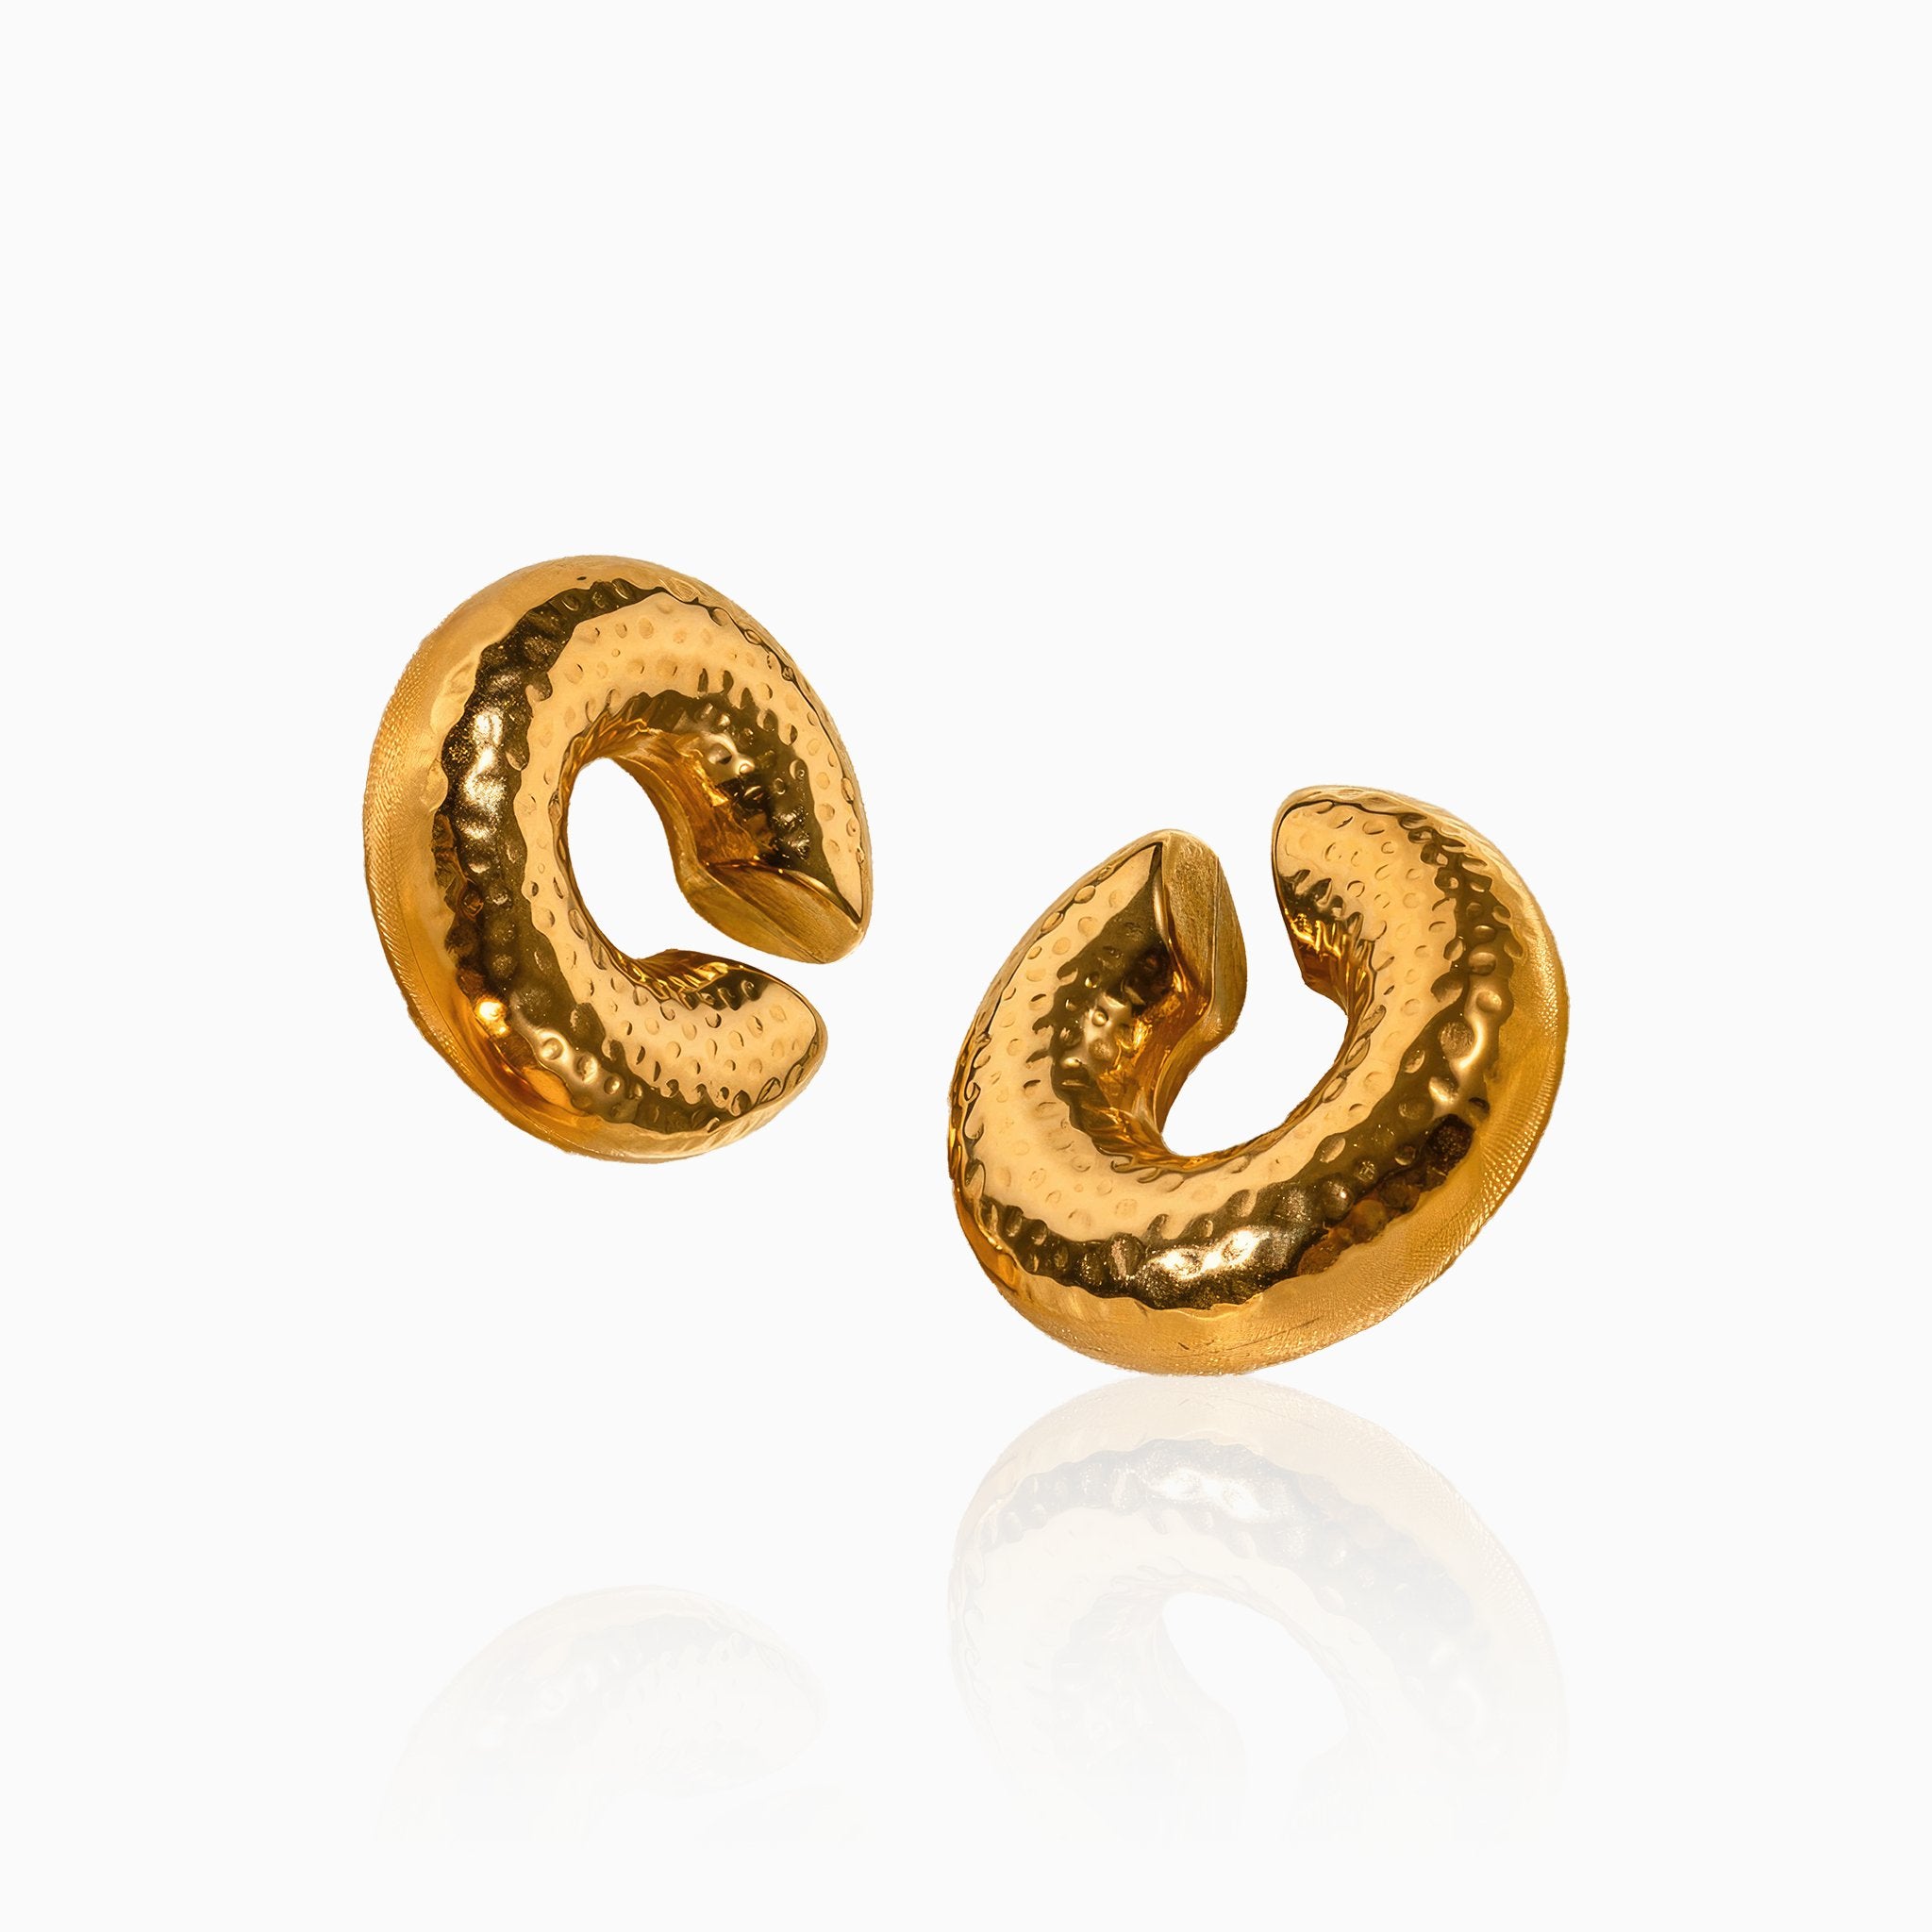 Textured Hollow Cylinder Earrings - Nobbier - Earrings - 18K Gold And Titanium PVD Coated Jewelry